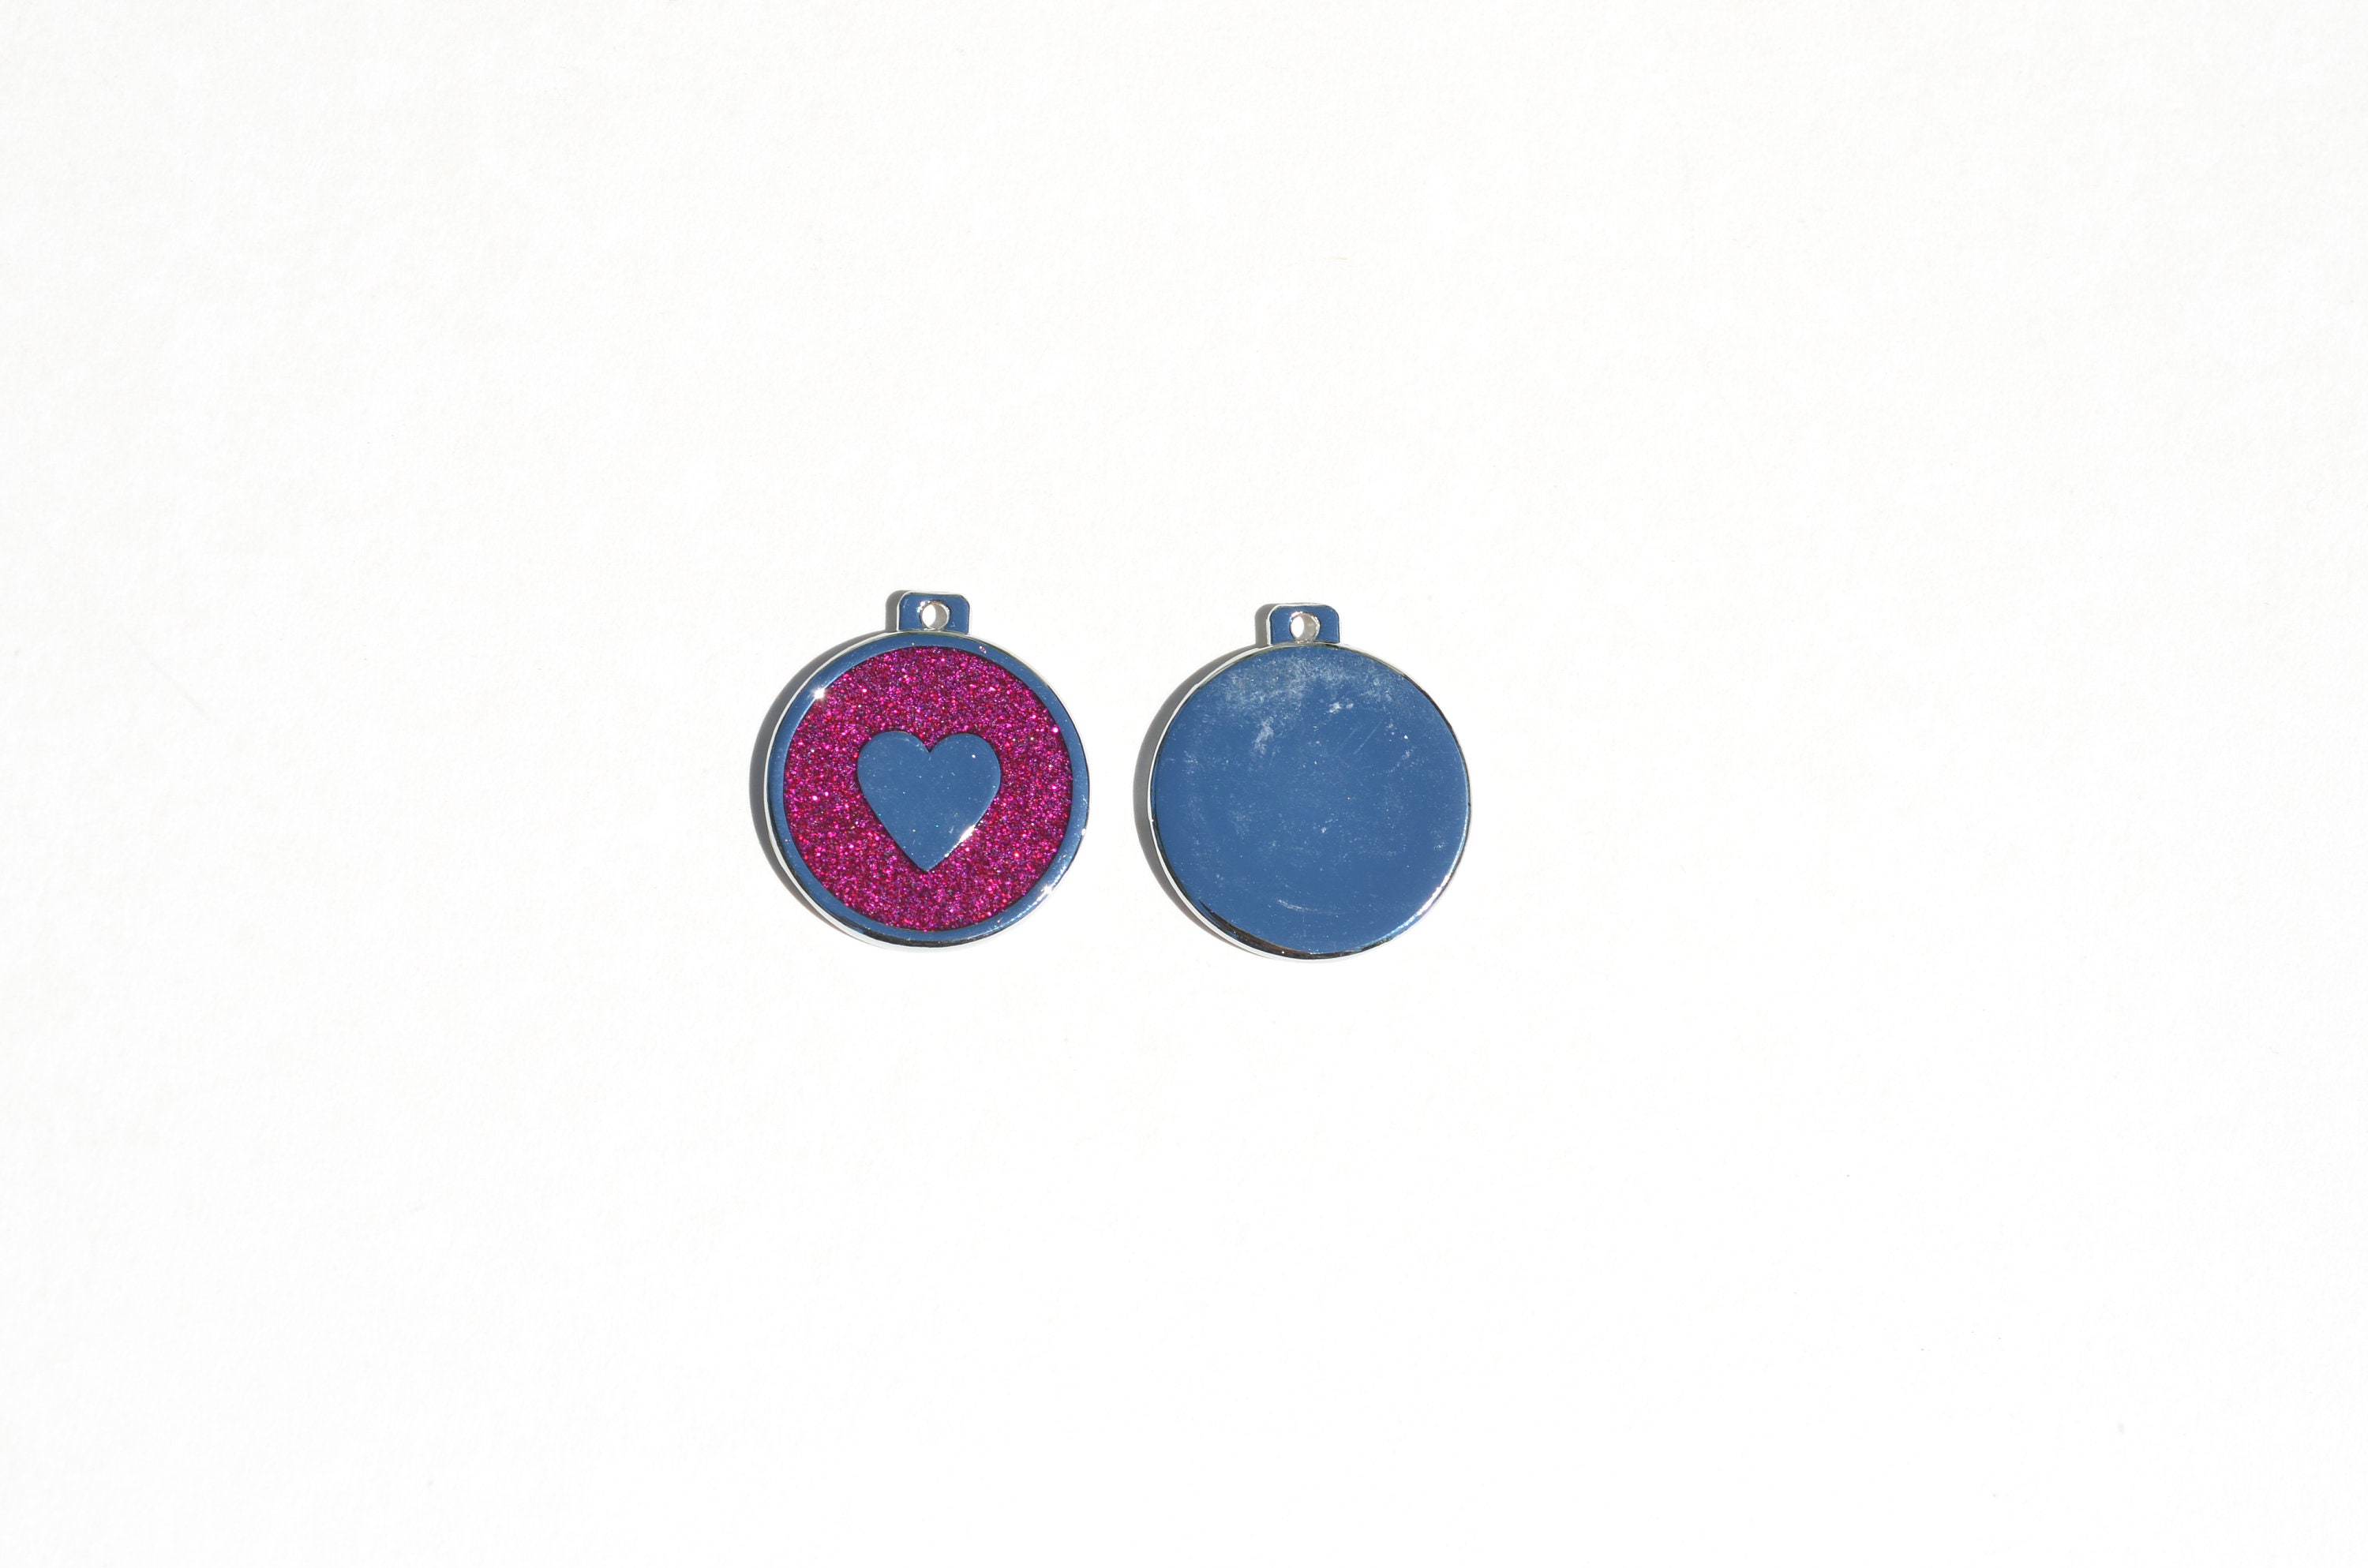 Pink Heart Charm Clasp – PindieGamer